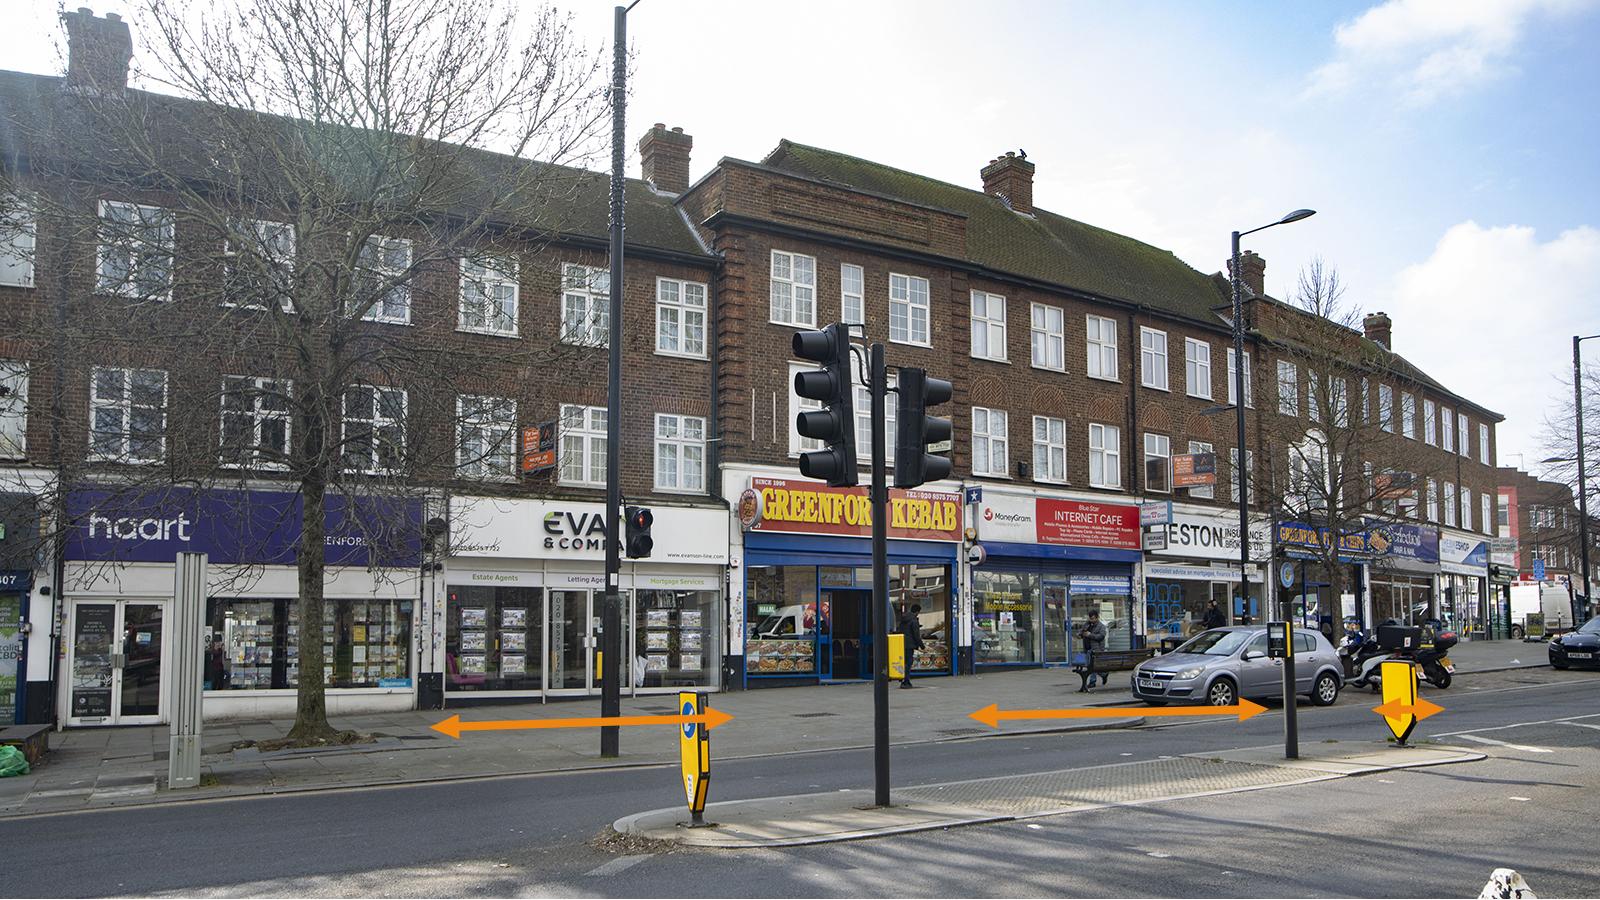 55, 59, 61 and 65 The Broadway<br>Greenford<br>London<br>UB6 9PN